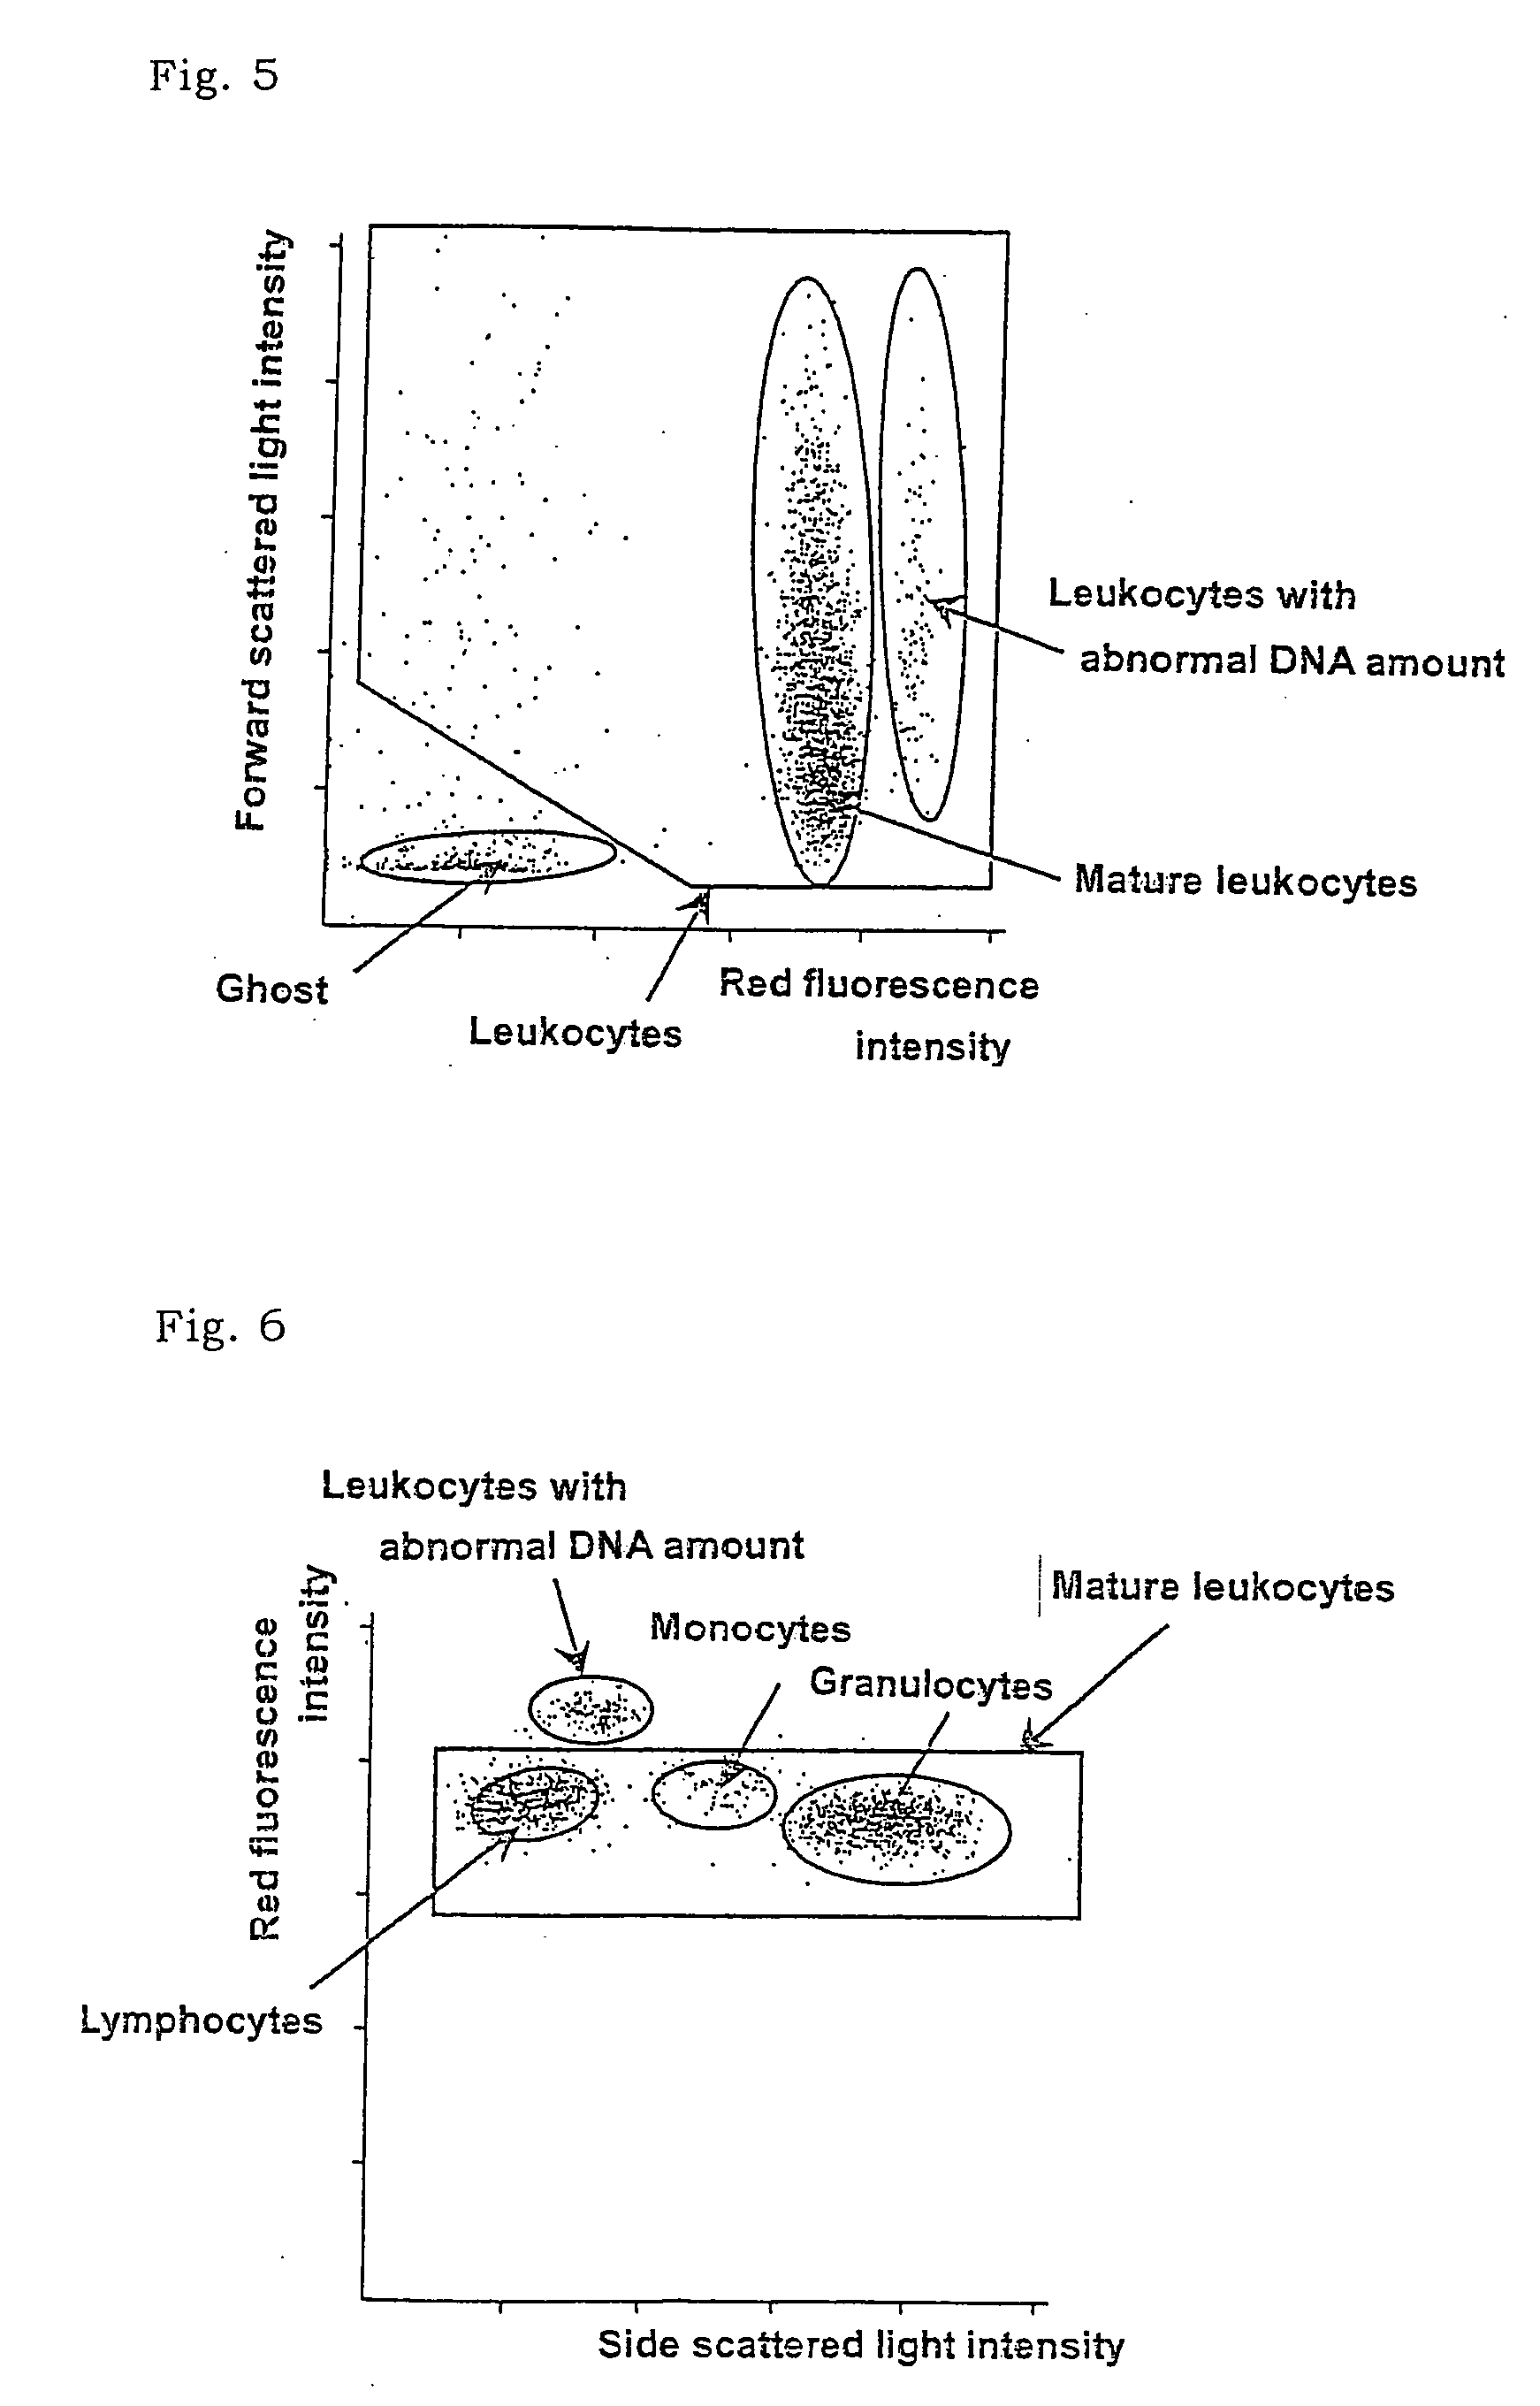 Method of classifying counting leucocytes